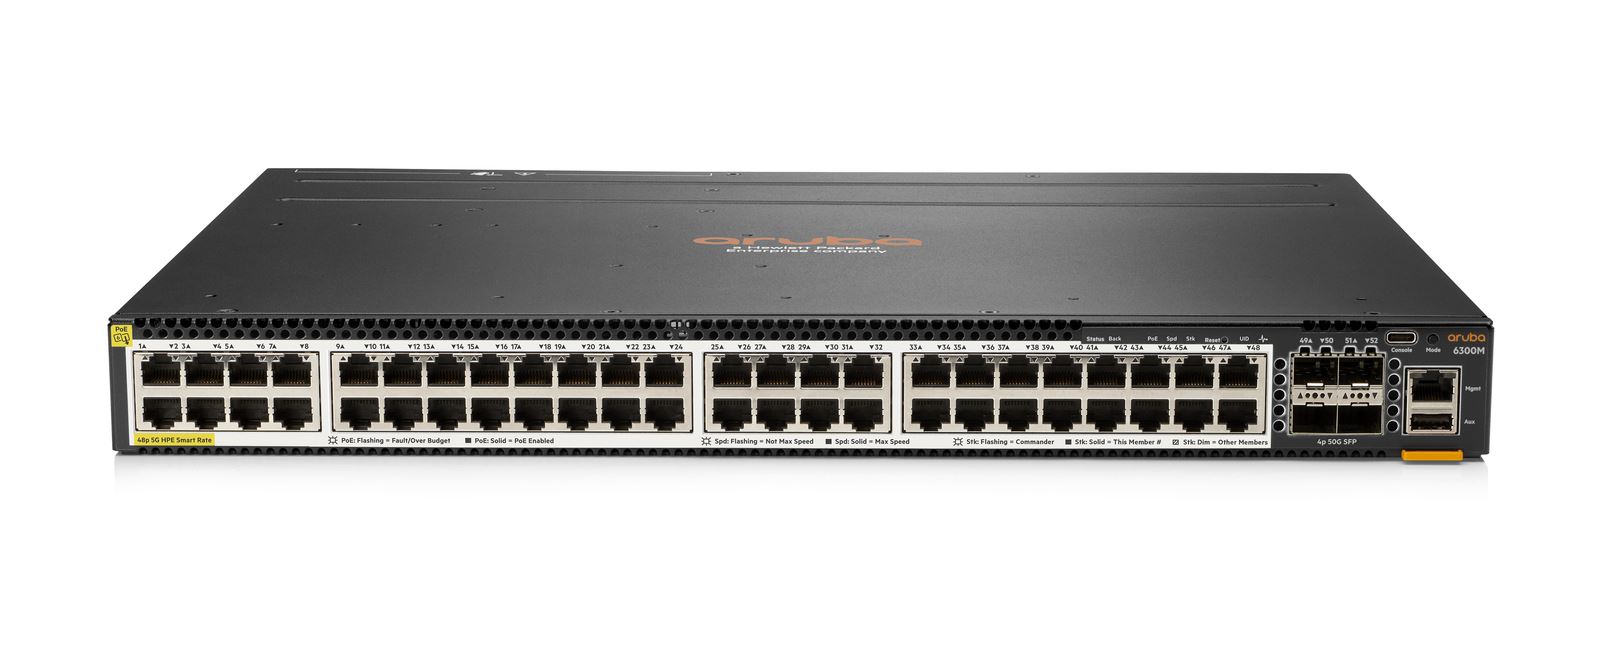 Aruba 6300M 48-port HPE Smart Rate 1/ 2.5/ 5GbE Class 6 PoE and 4-port SFP56 Switch JL659A RENEW0 